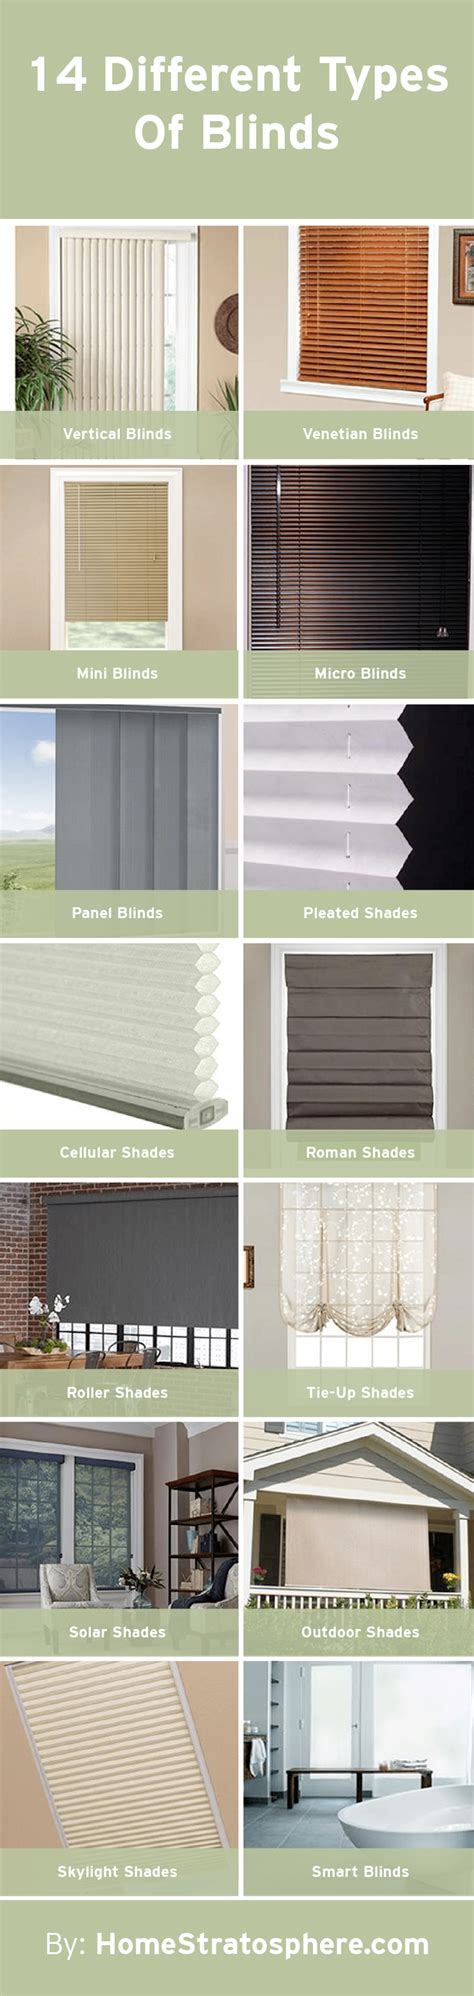 14 different types of blinds extensive buying guide types of blinds types of curtains panel